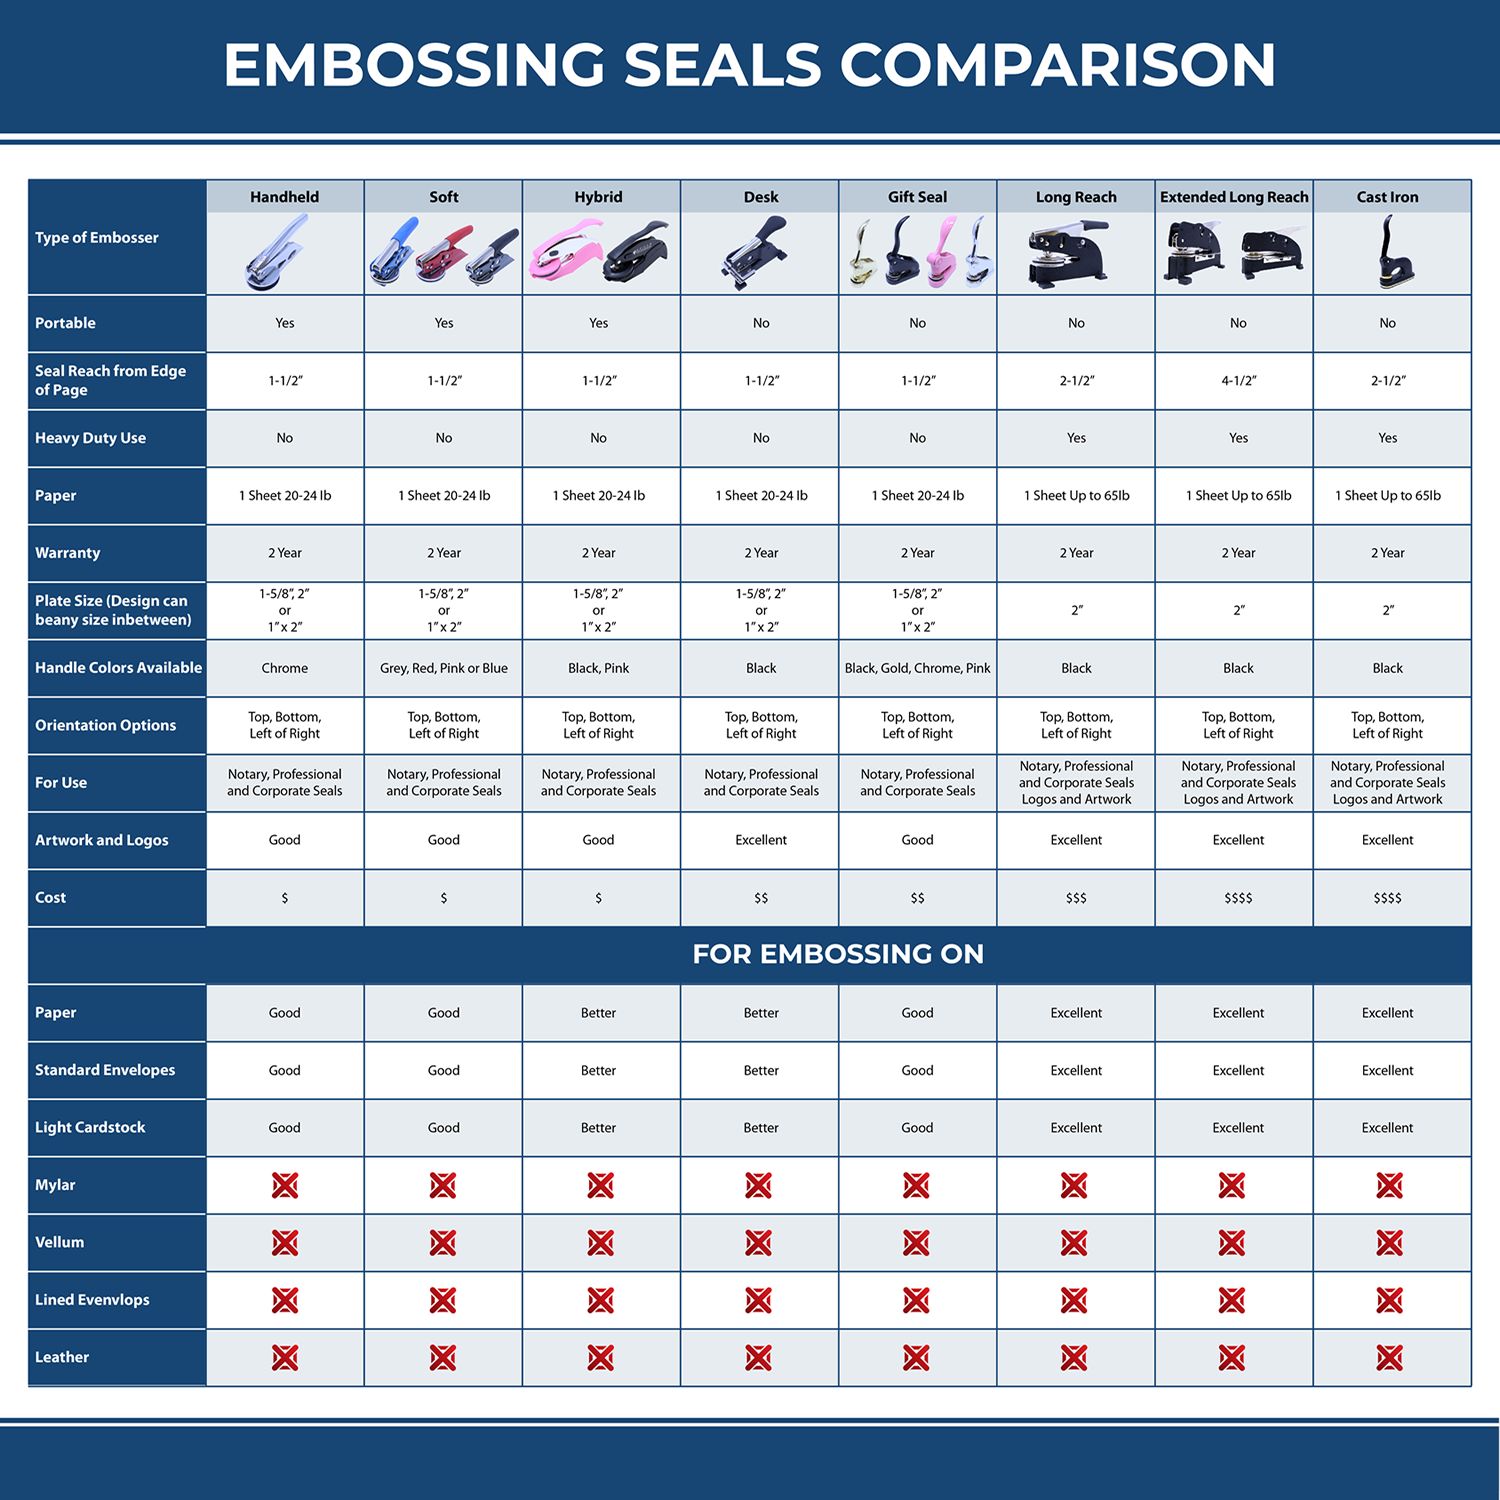 A comparison chart for the different types of mount models available for the State of Kentucky Extended Long Reach Landscape Architect Seal Embosser.